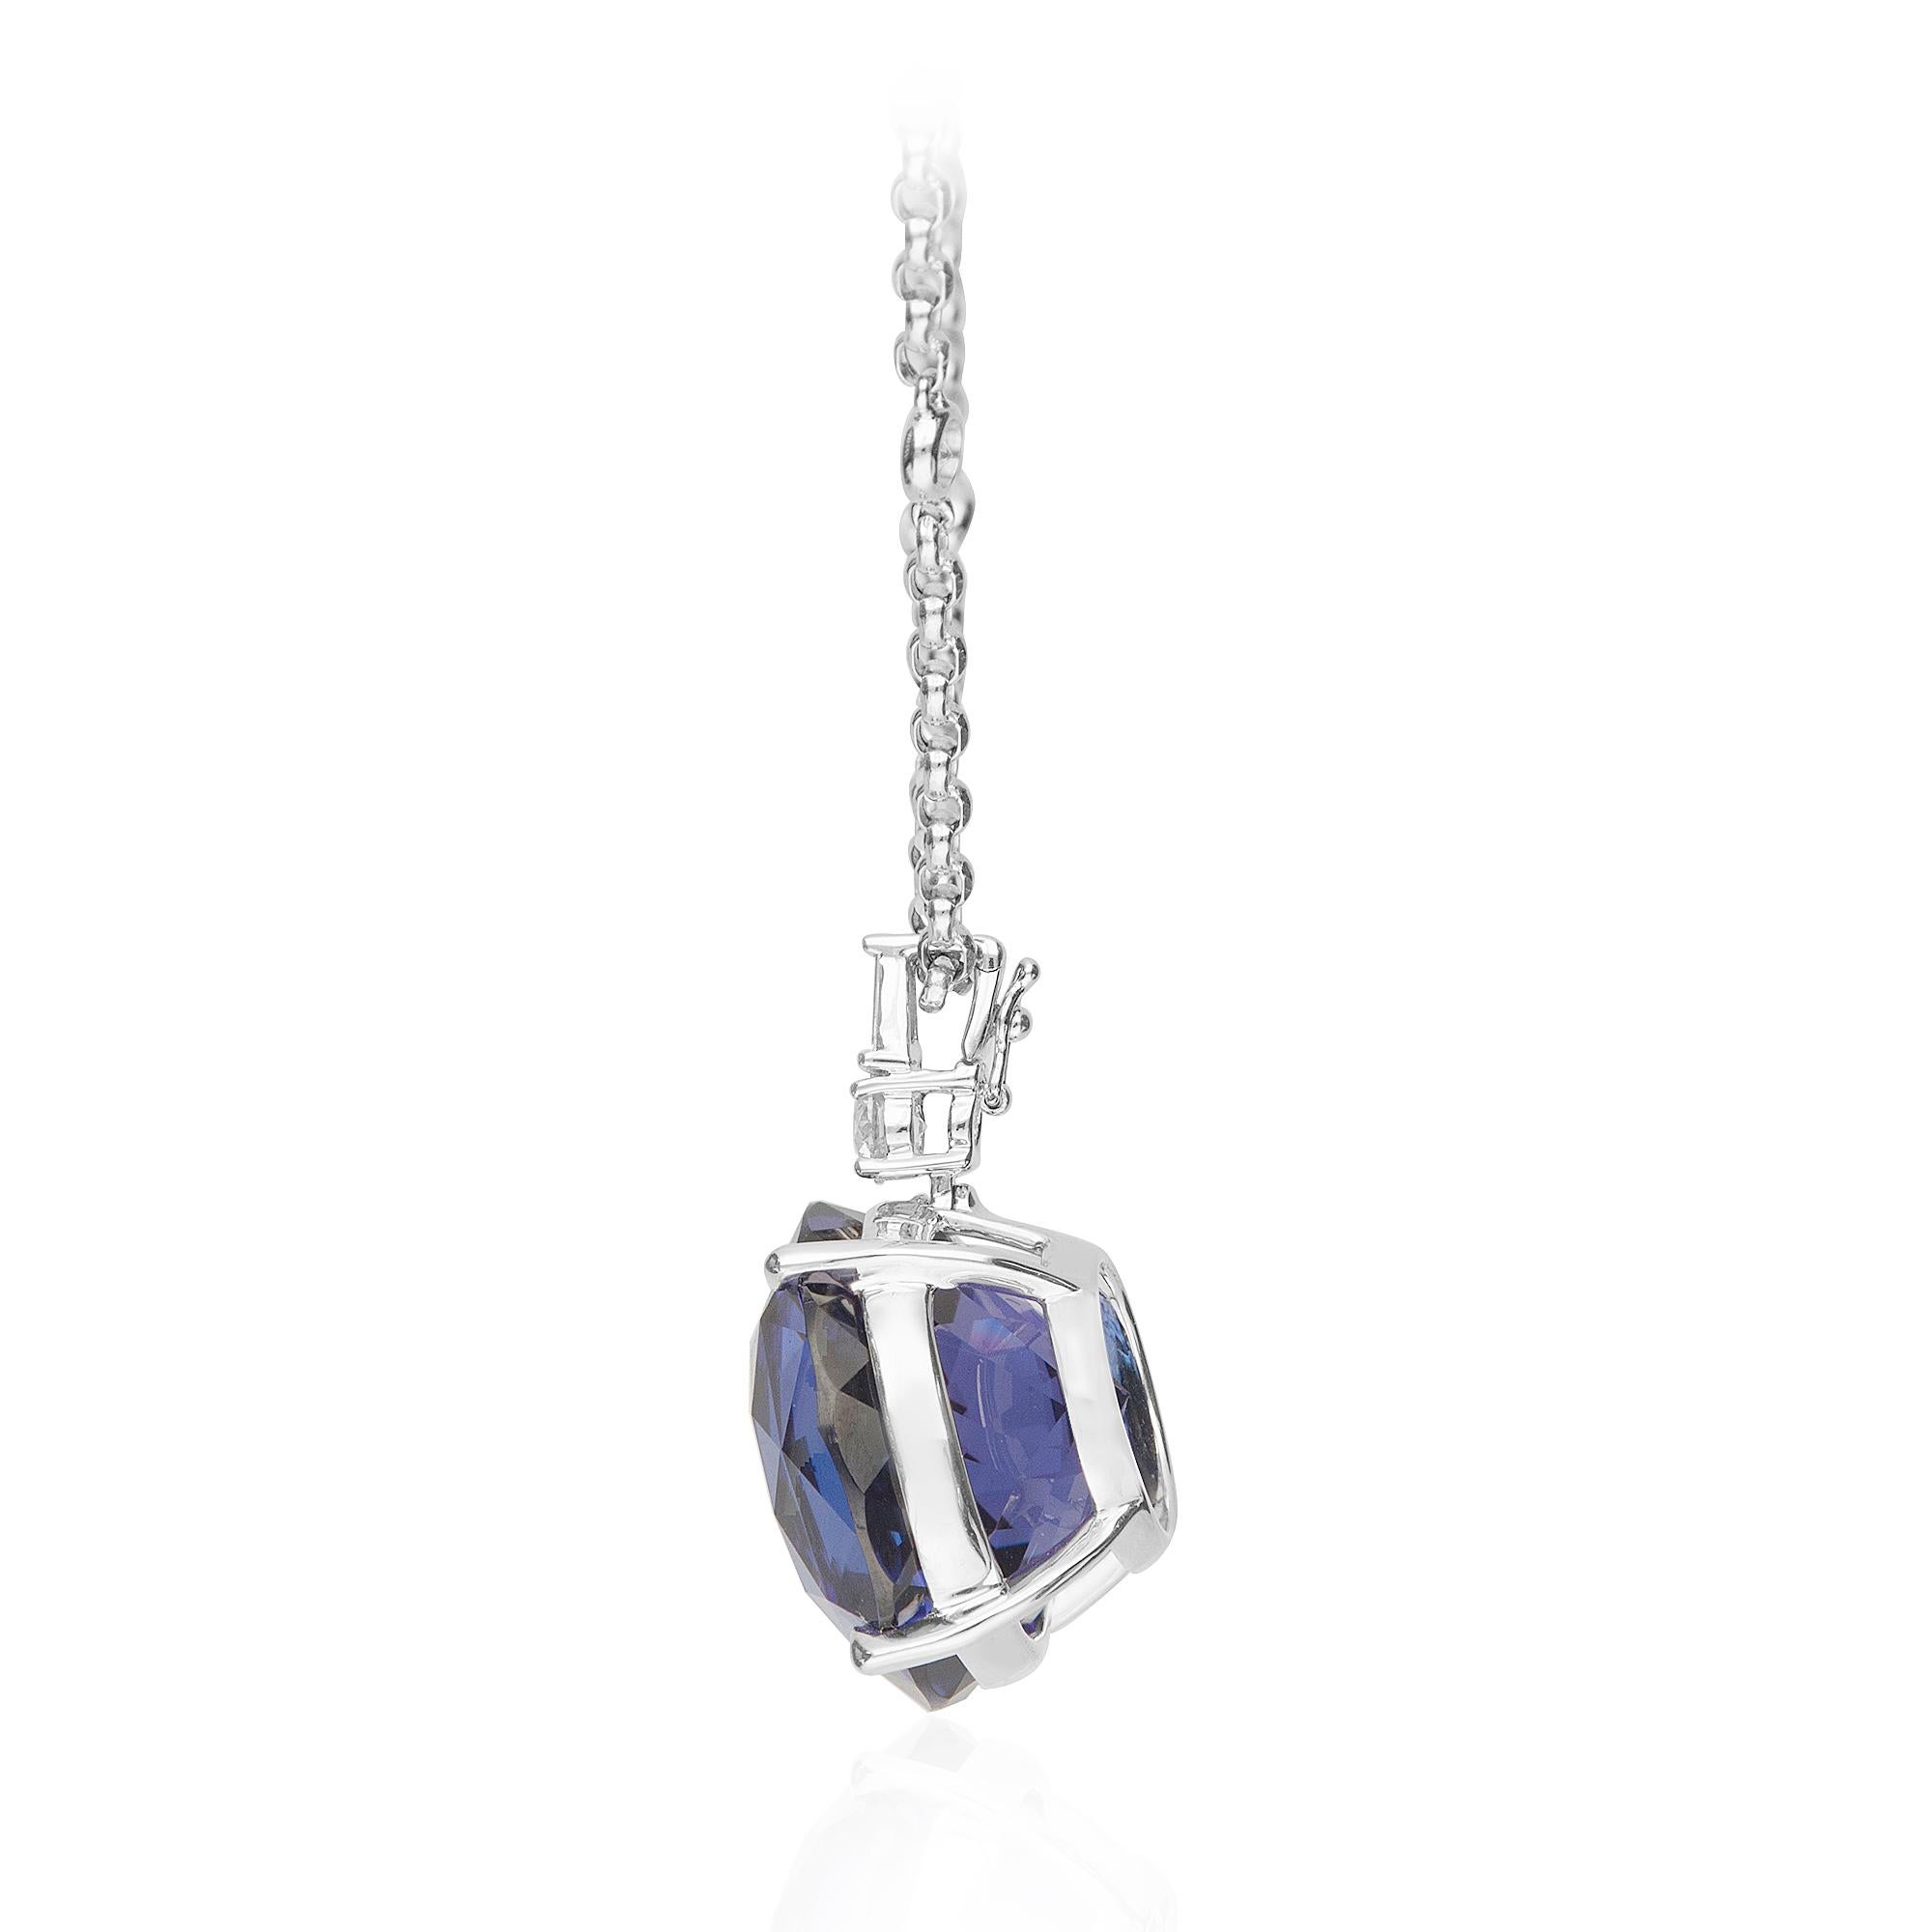 This beautiful pendant Necklace is crafted in 18-karat White gold. It features a 20.5 mm round Tanzanite weighing 44.73 Carat, 9 brilliant cut round diamonds 1.17 ct., and 2 Baguette diamonds 0.19 ct. GH-SI quality. 

This necklace comes with 18k